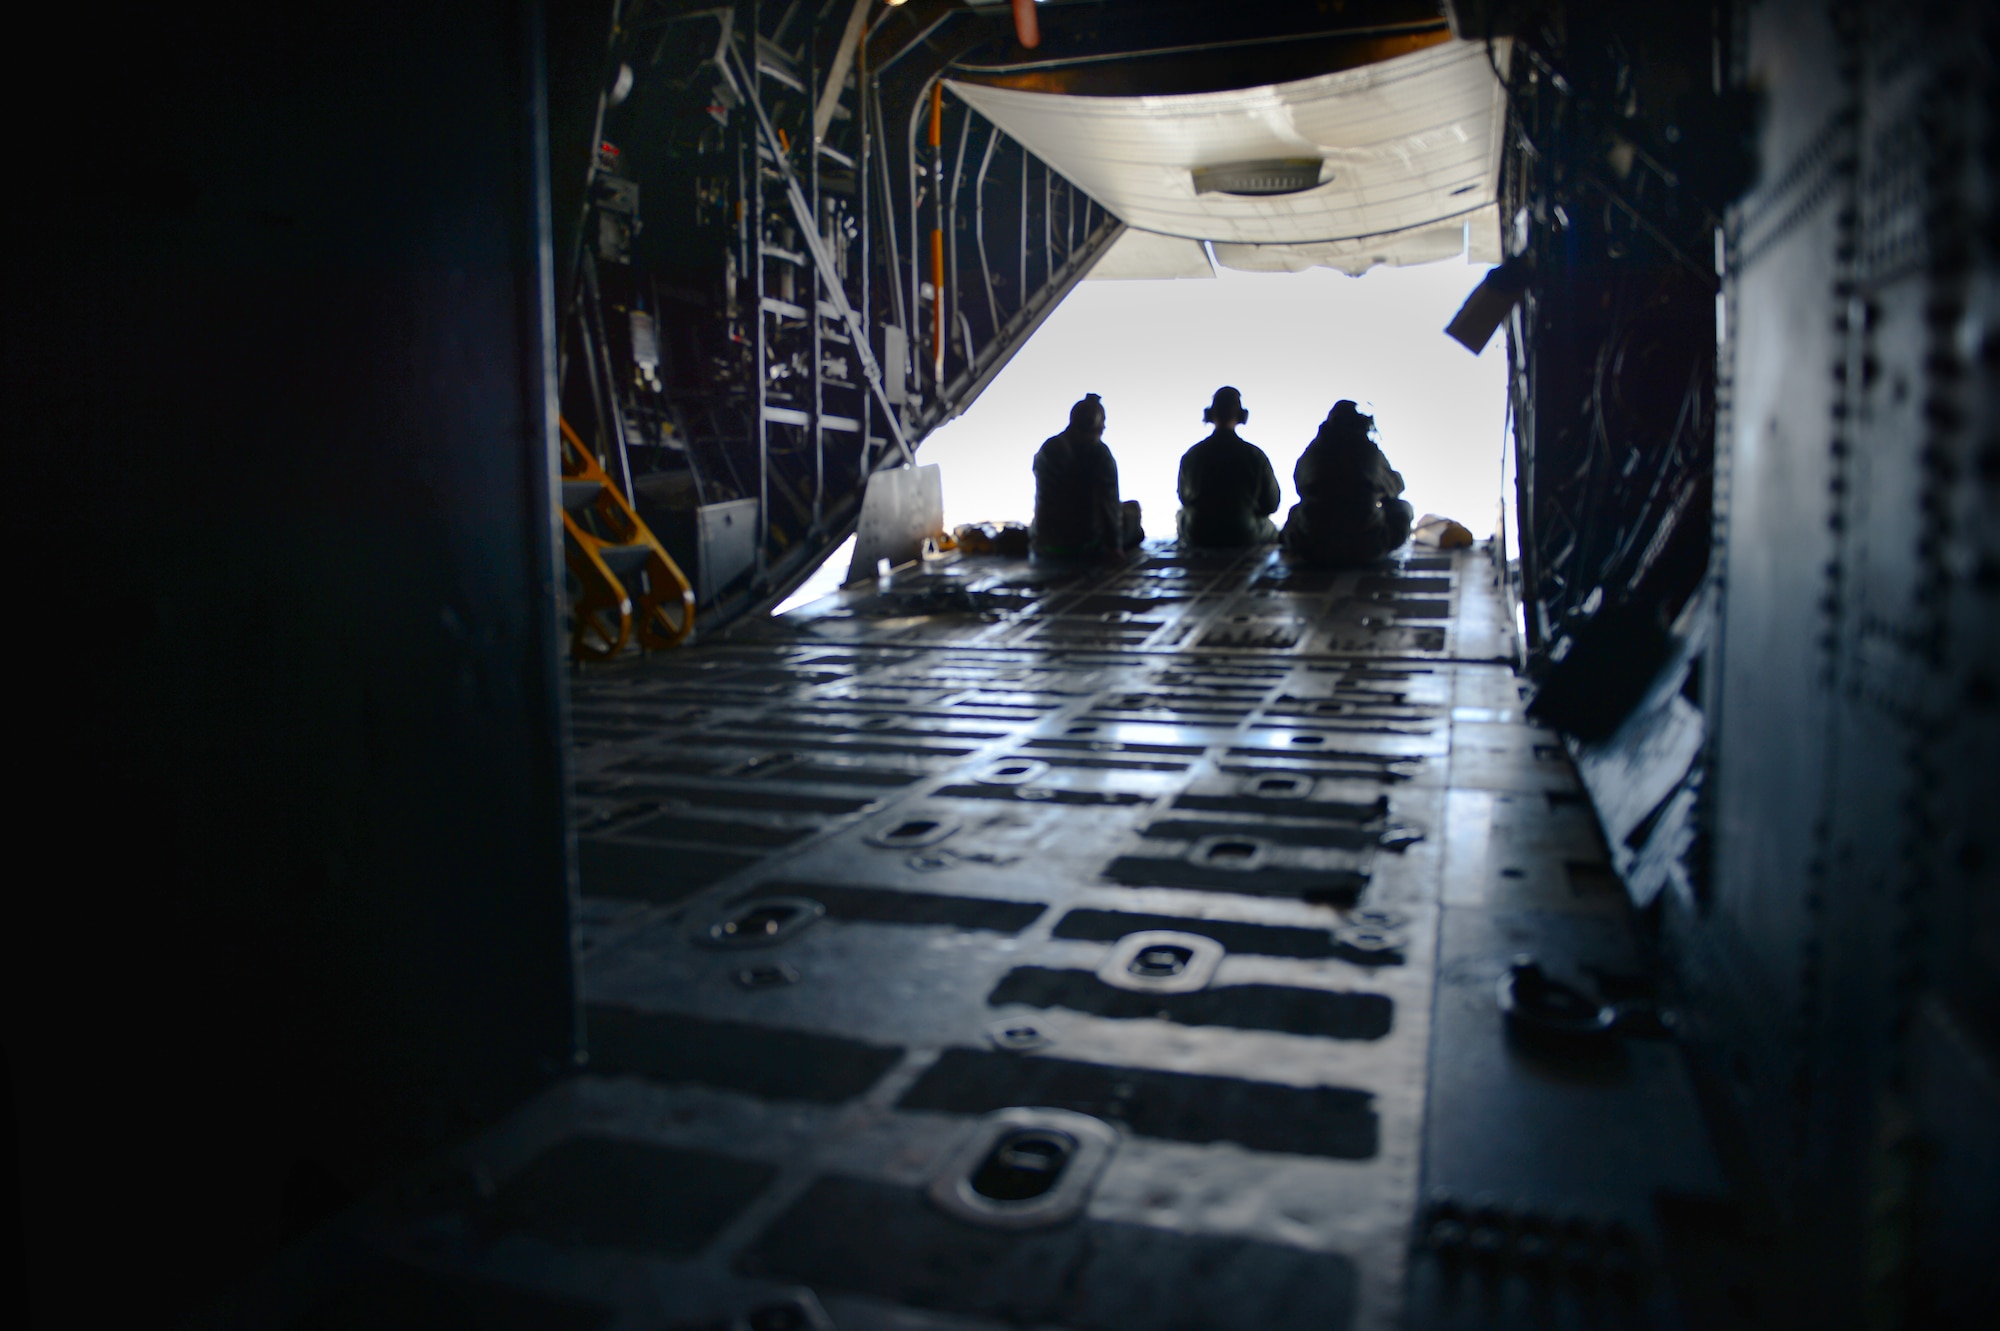 U.S. Air Force Master Sgt. Stephen White, 27th Special Operations Aircraft Maintenance Squadron lead production superintendent, Senior Airman Kyle Olmsted, 16th Special Operations Squadron loadmaster, and Senior Airman Katherine Bontuyan, 27 SOAMXS dedicated crew chief for "Bad Company" peer out of the back of the AC-130H Spectre gunship Bad Company as it taxis on the runway after landing at Davis-Monthan Air Force Base, Ariz., Feb. 7, 2014. Built in 1969 Bad Company is the first of six Spectre gunships scheduled to make the trip to Davis-Monthan Air Force Base, Ariz. (U.S. Air Force photo/ Senior Airman Eboni Reece)